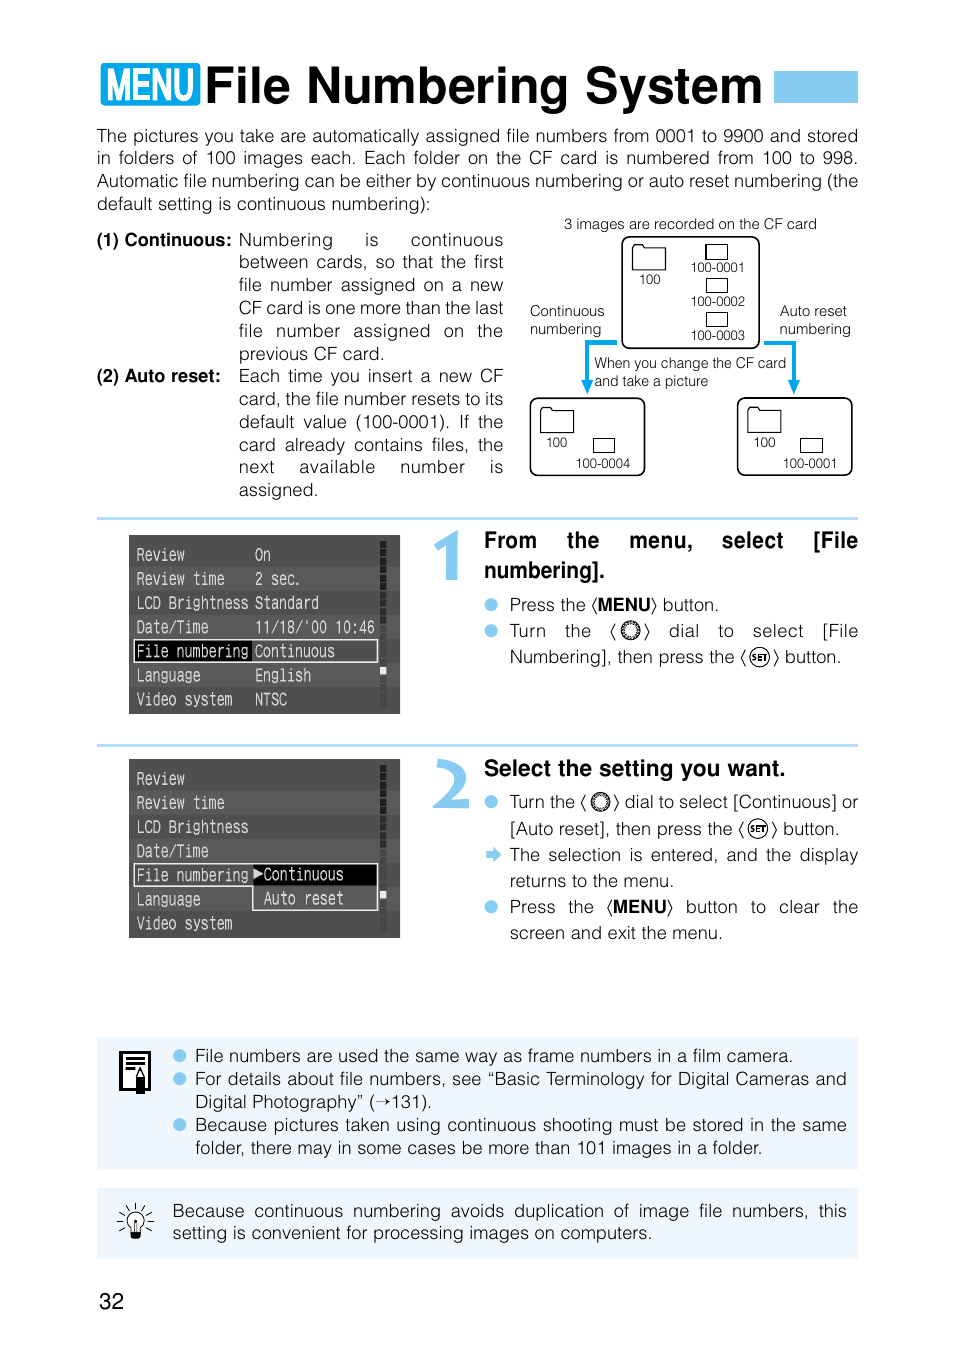 File numbering system | Canon EOS D30 User Manual | Page 32 / 152